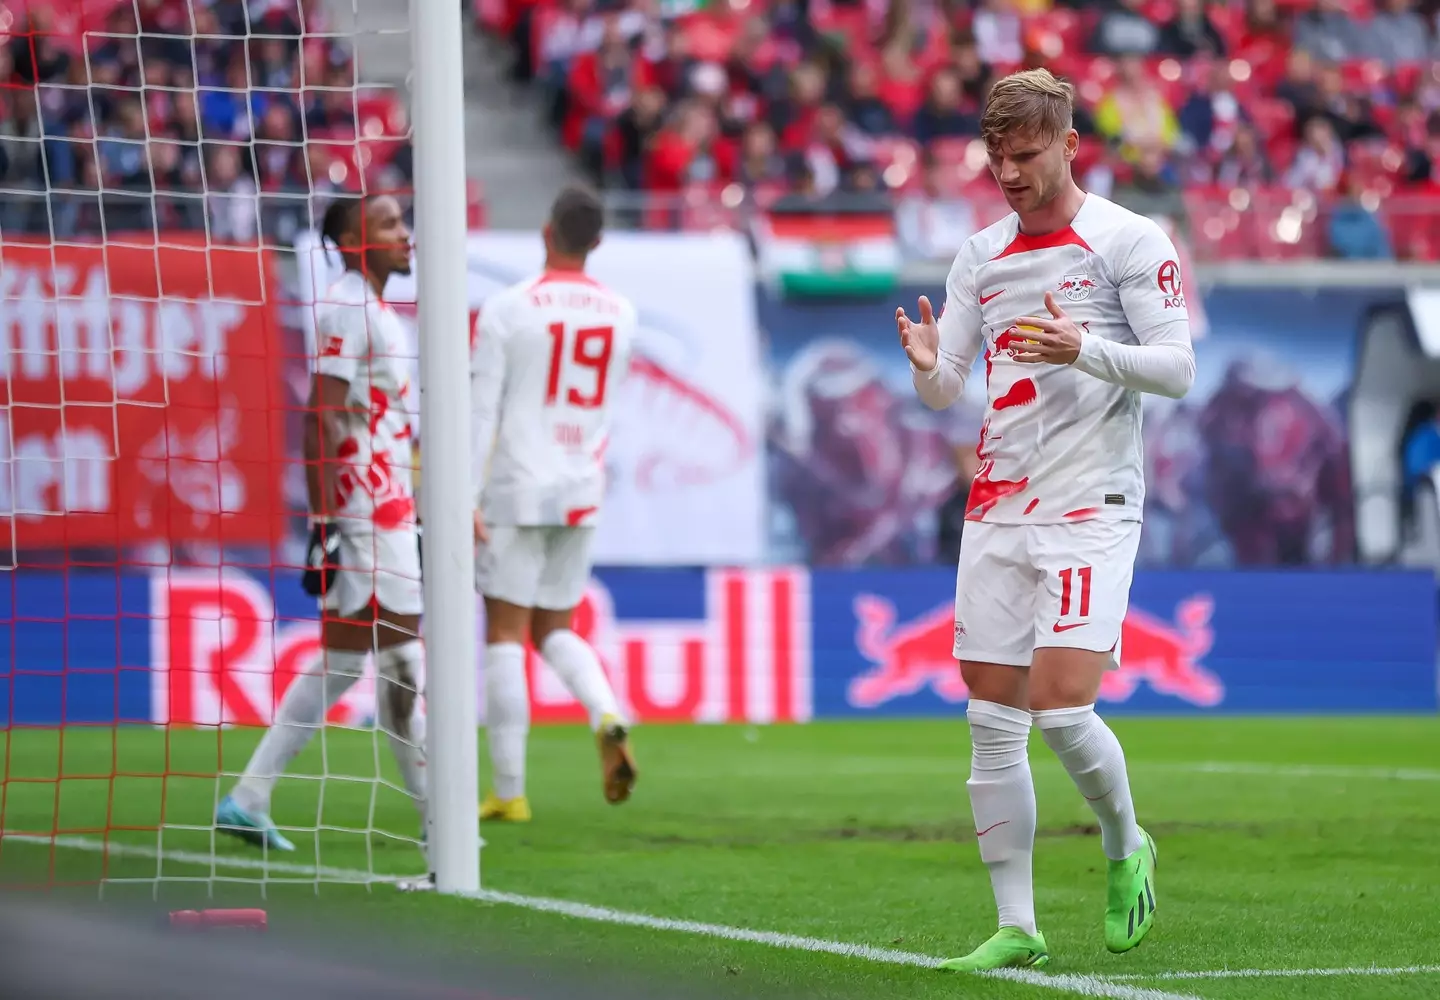 Timo Werner in action for RB Leipzig. (Alamy)